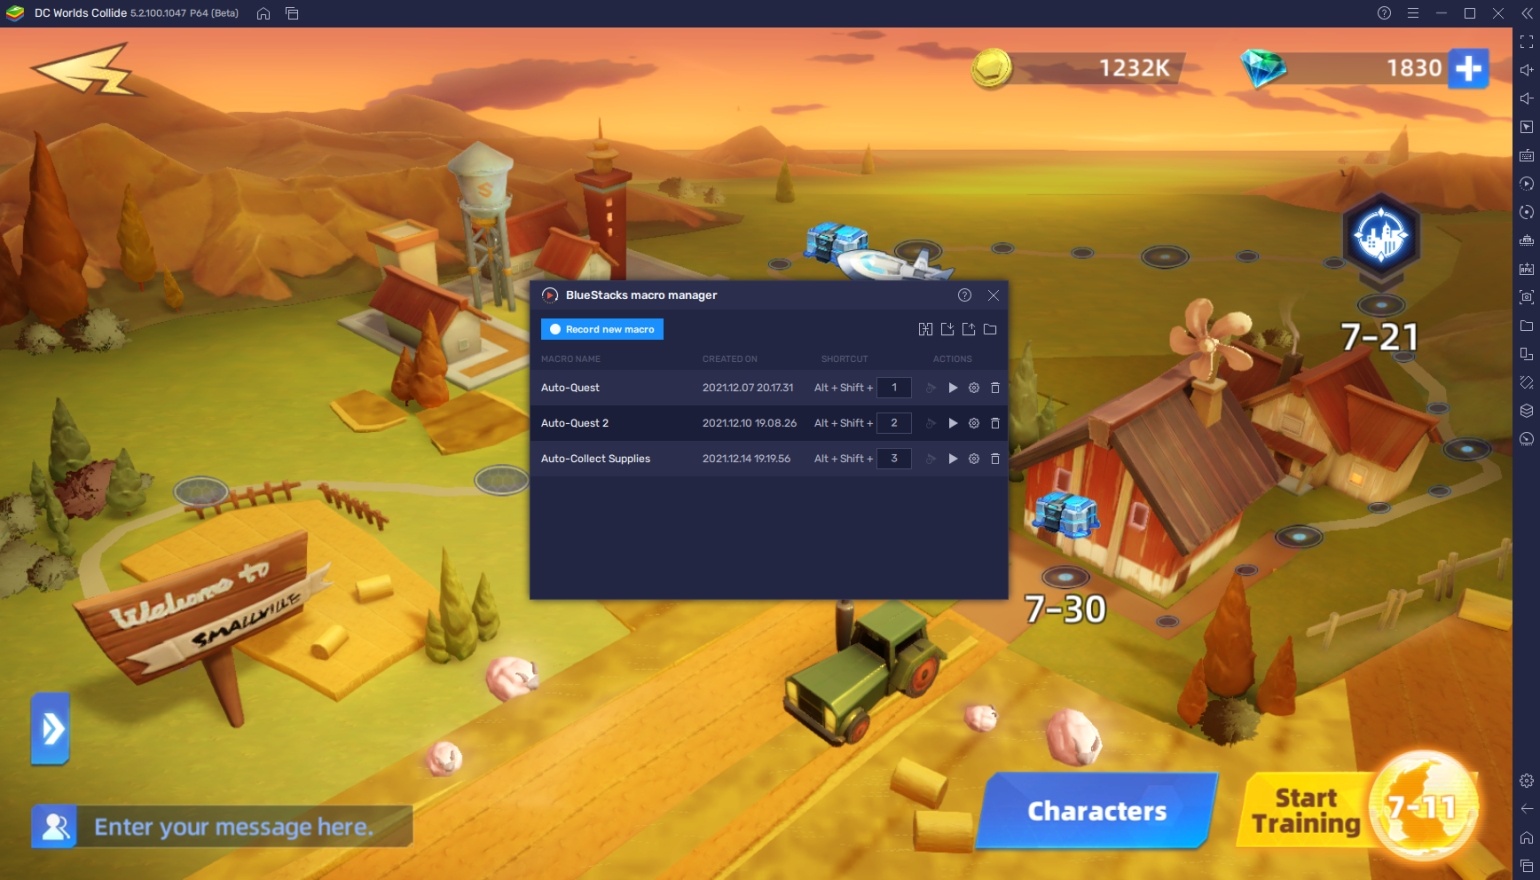 How To Play DC Worlds Collide on PC with BlueStacks